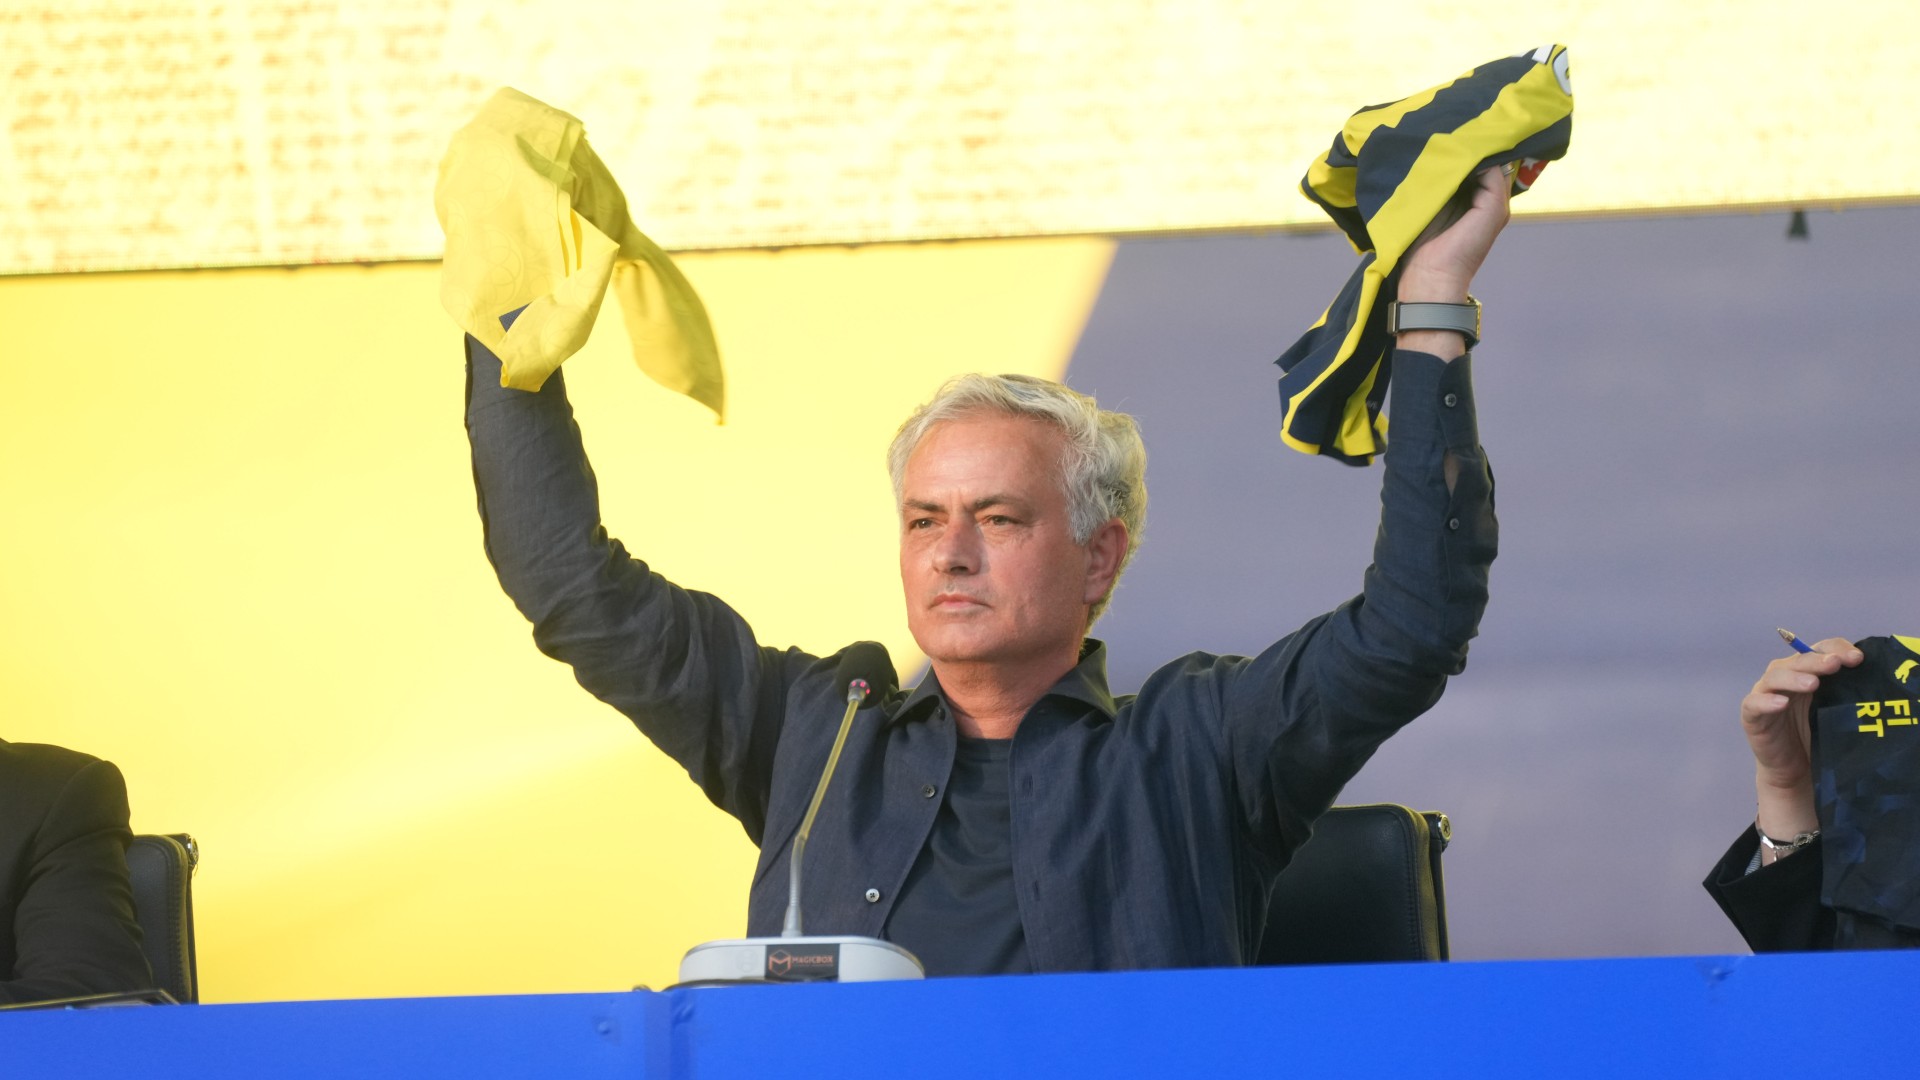 Mourinho brings added attention